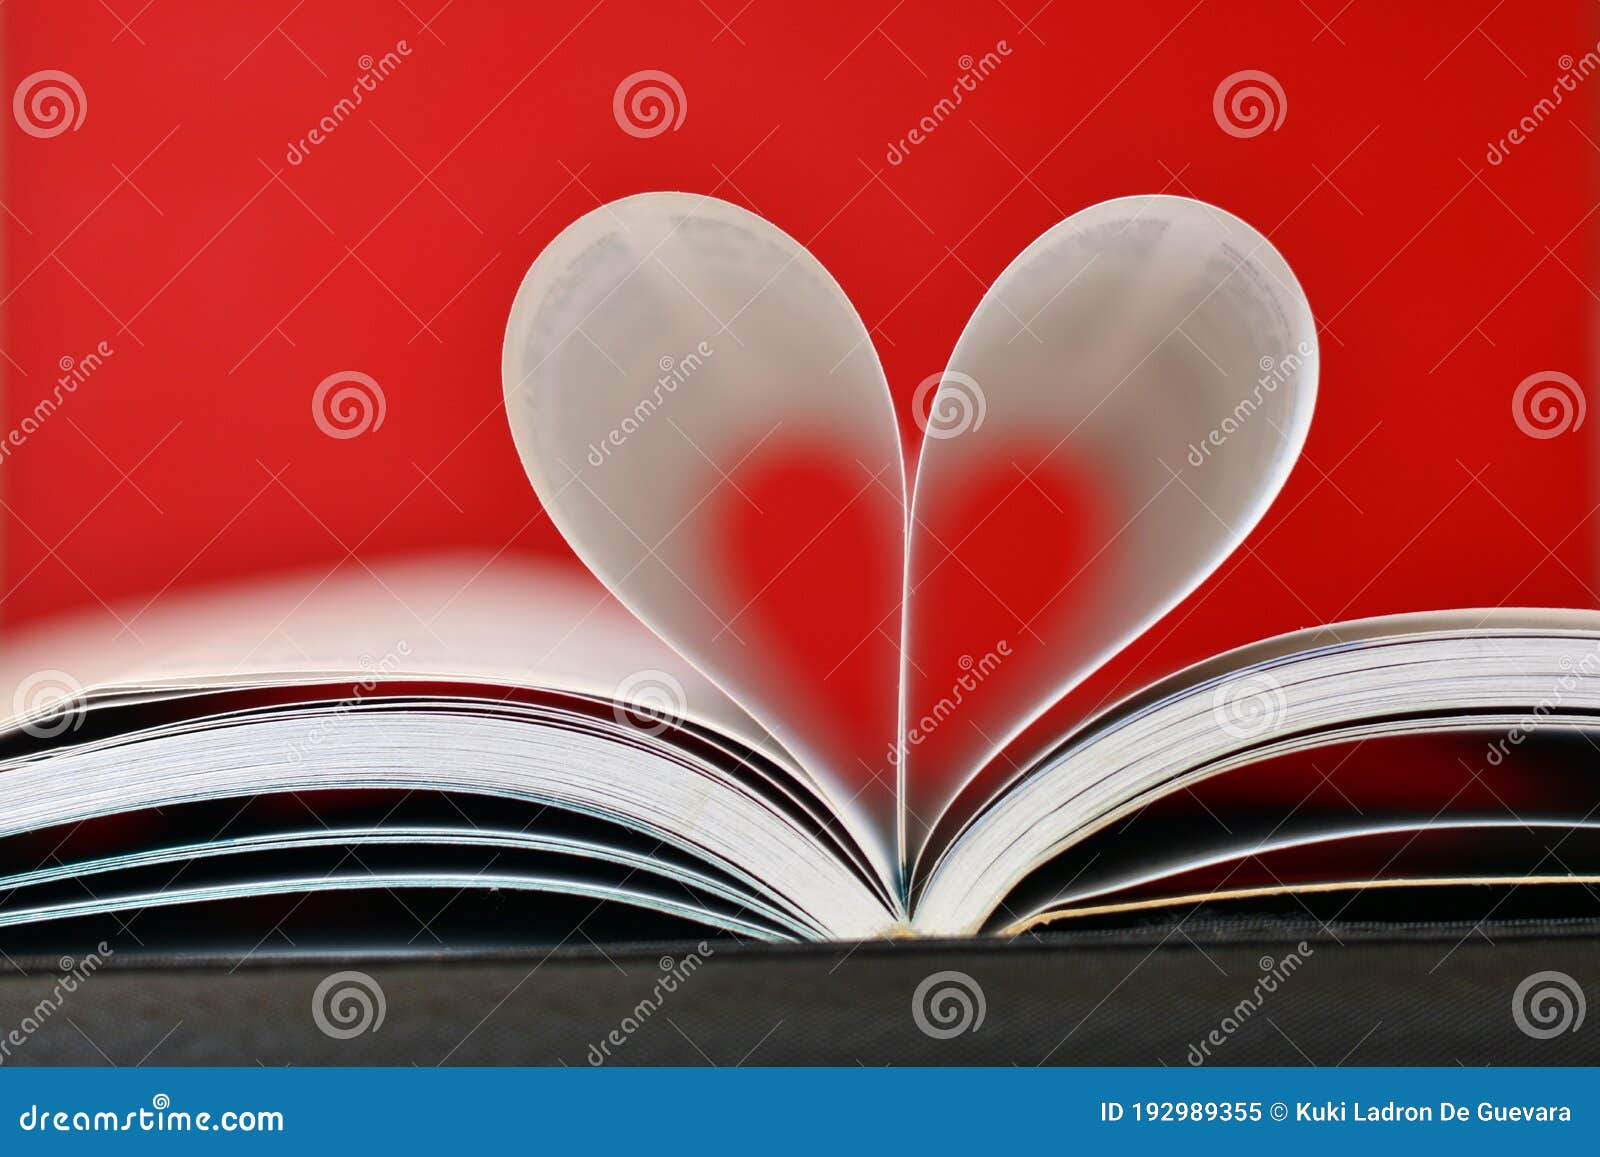 pages of a book curved into a heart 